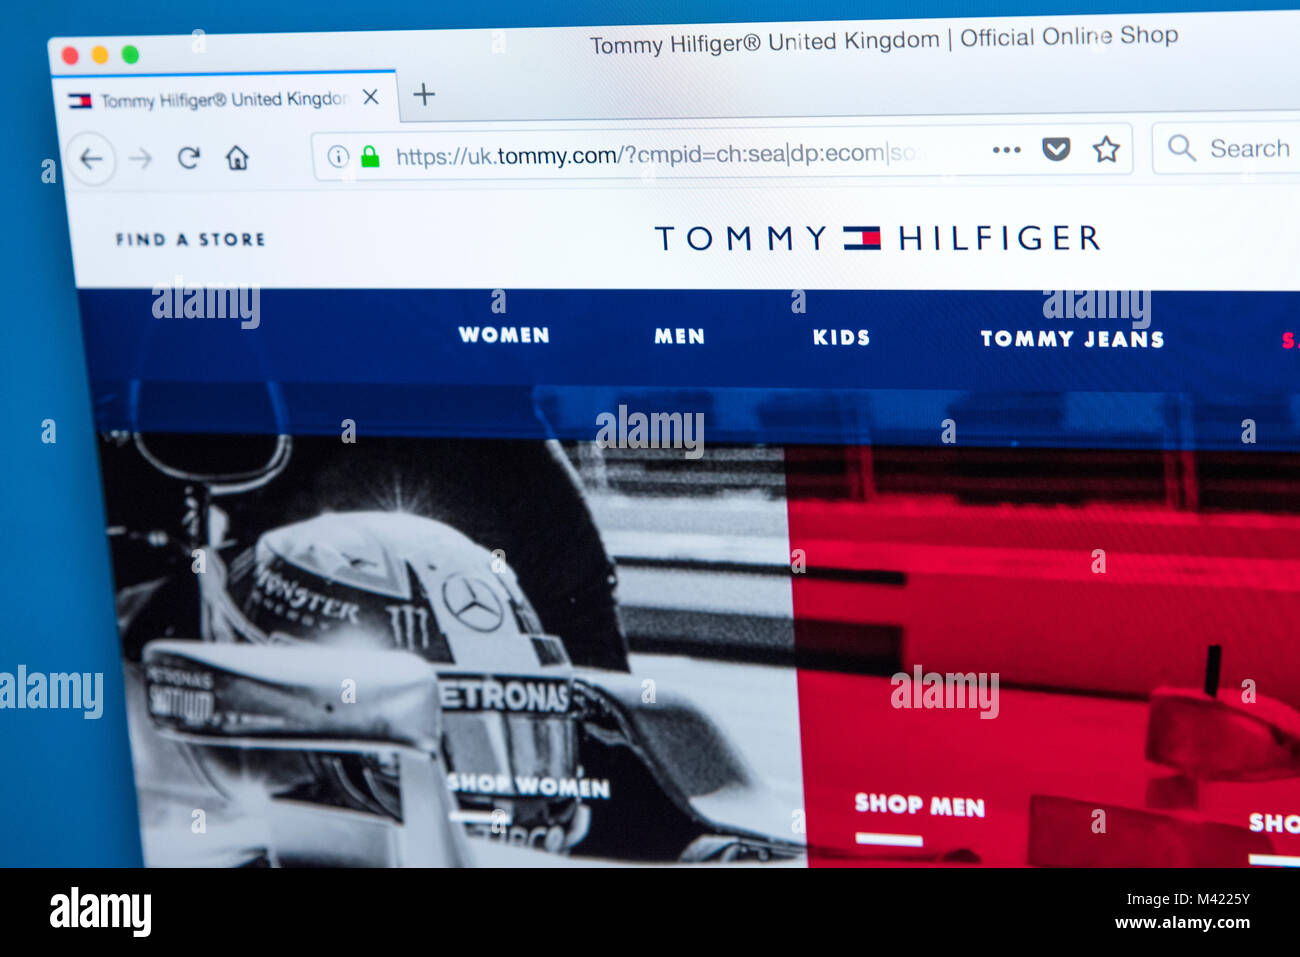 Tommy Hilfiger 2018 High Resolution Stock Photography and Images - Alamy